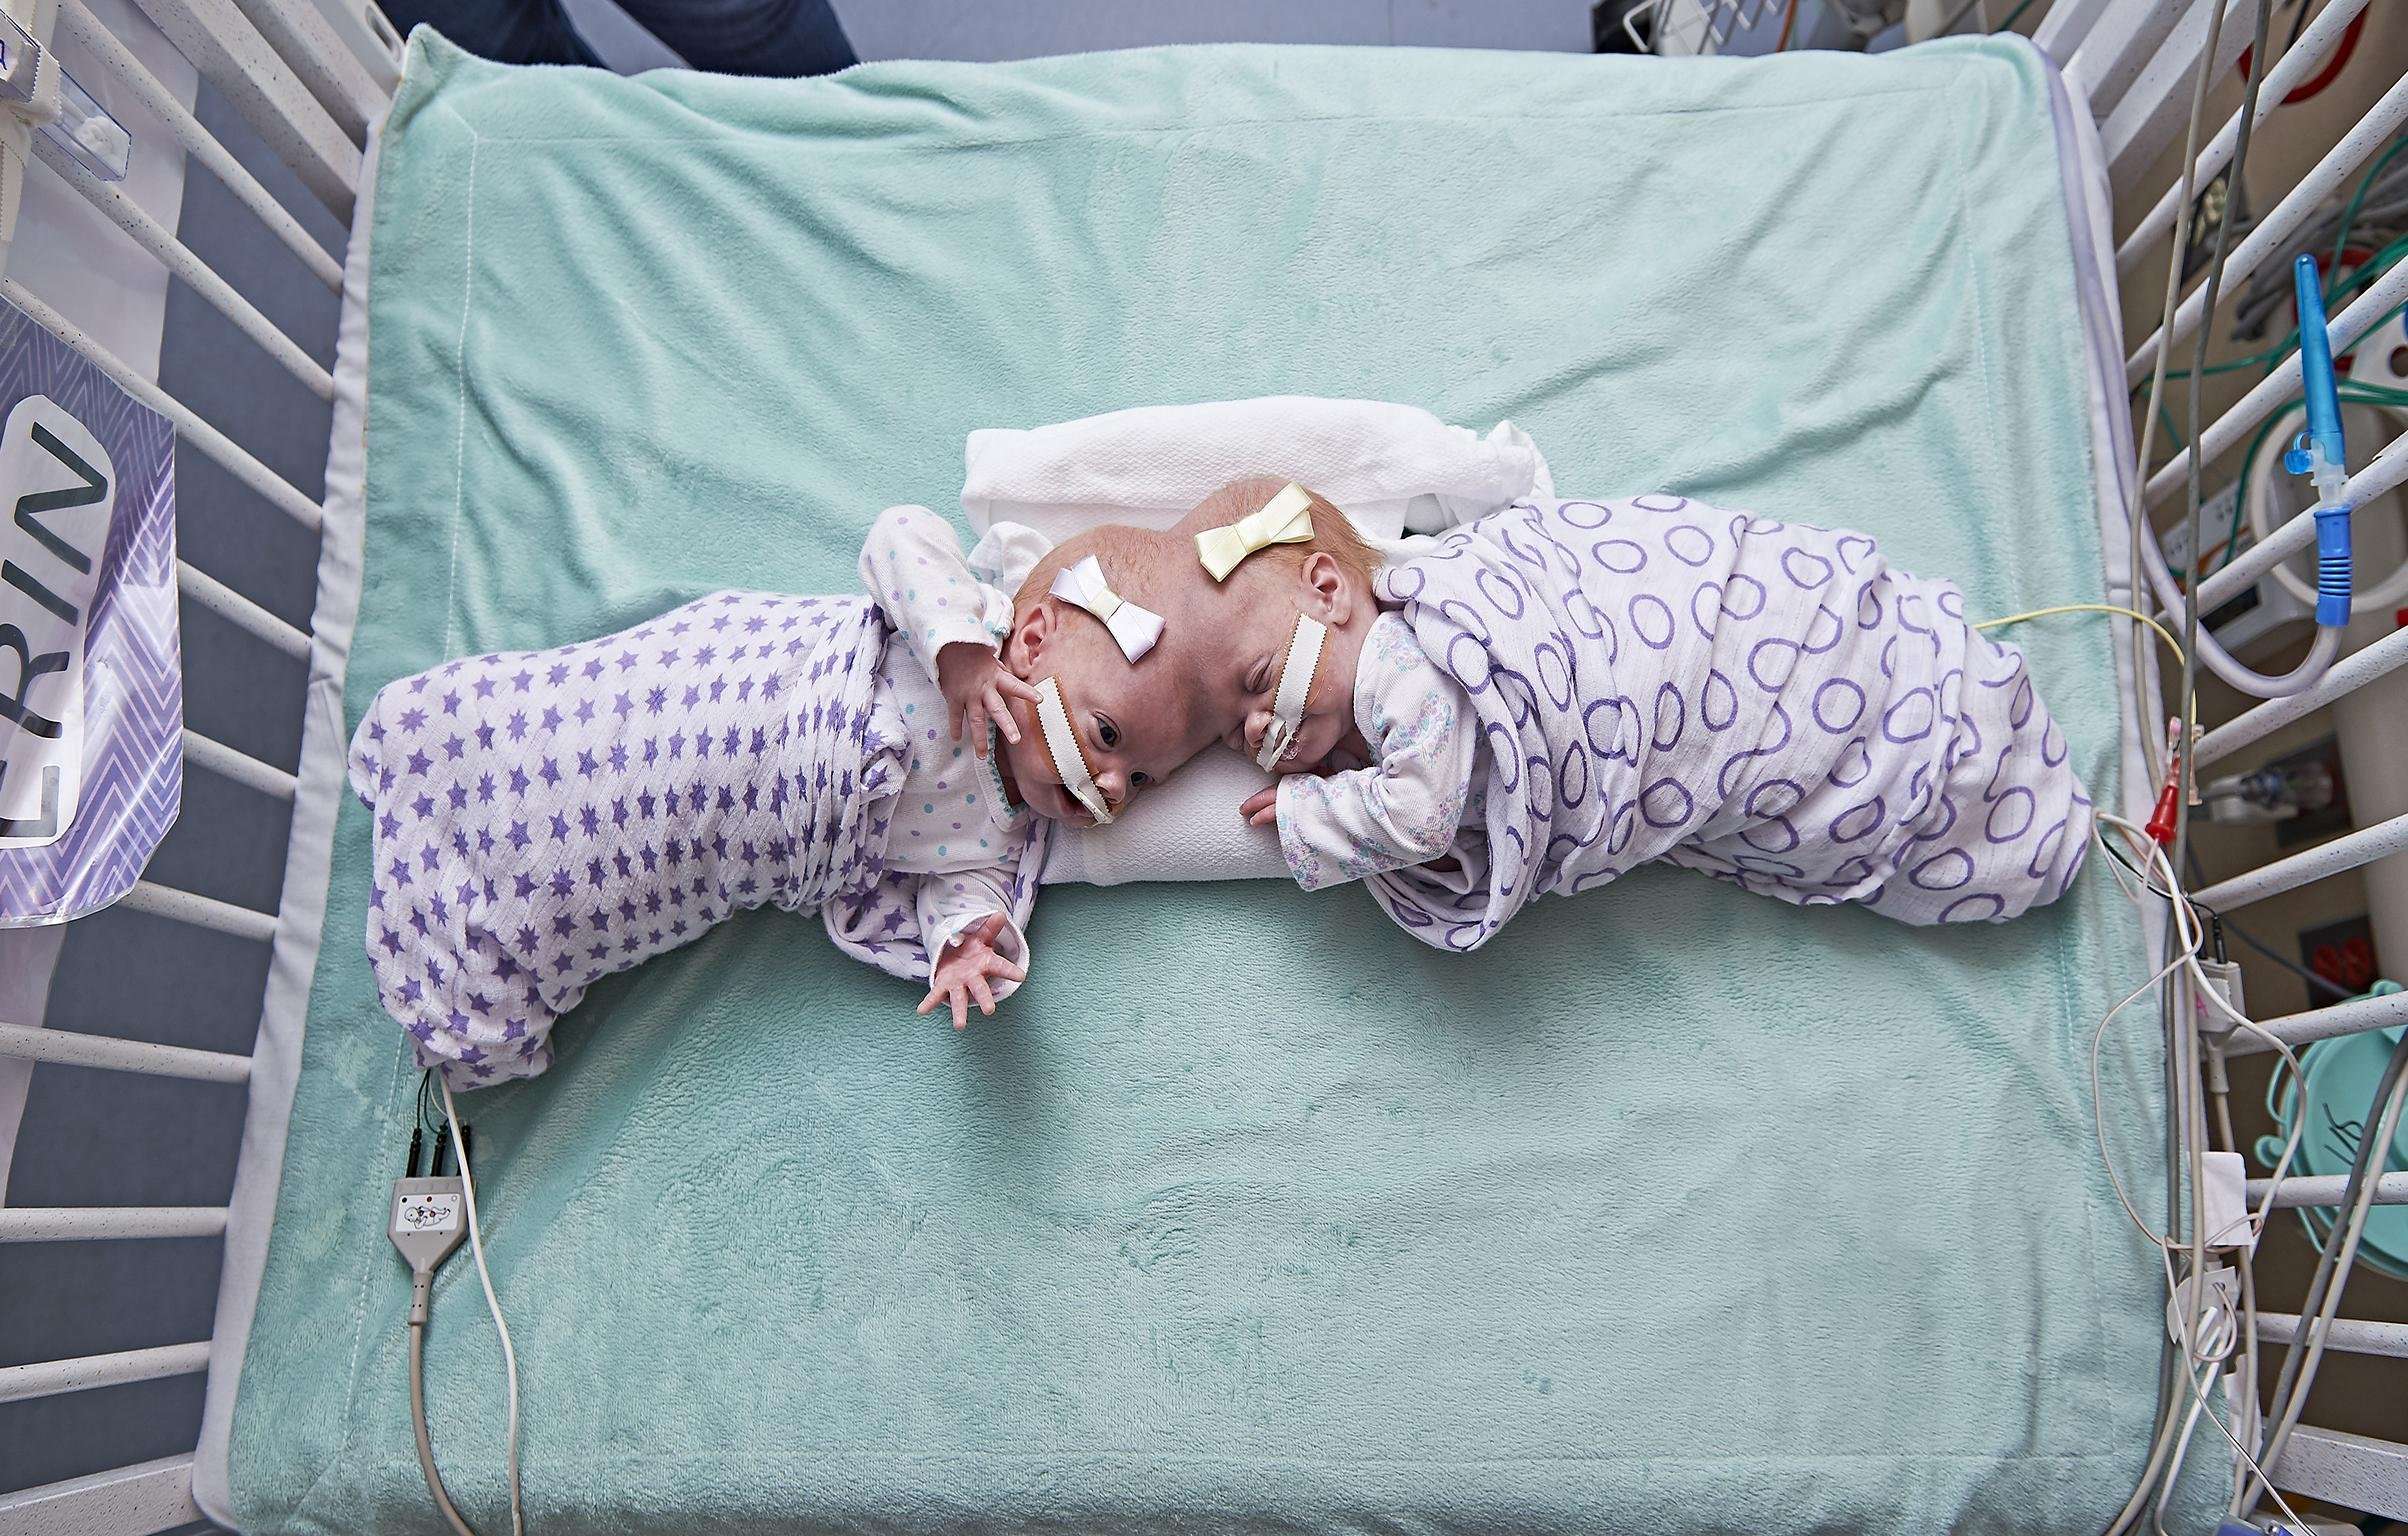 image for Twin girls conjoined at the head successfully separated by 30-strong surgical team